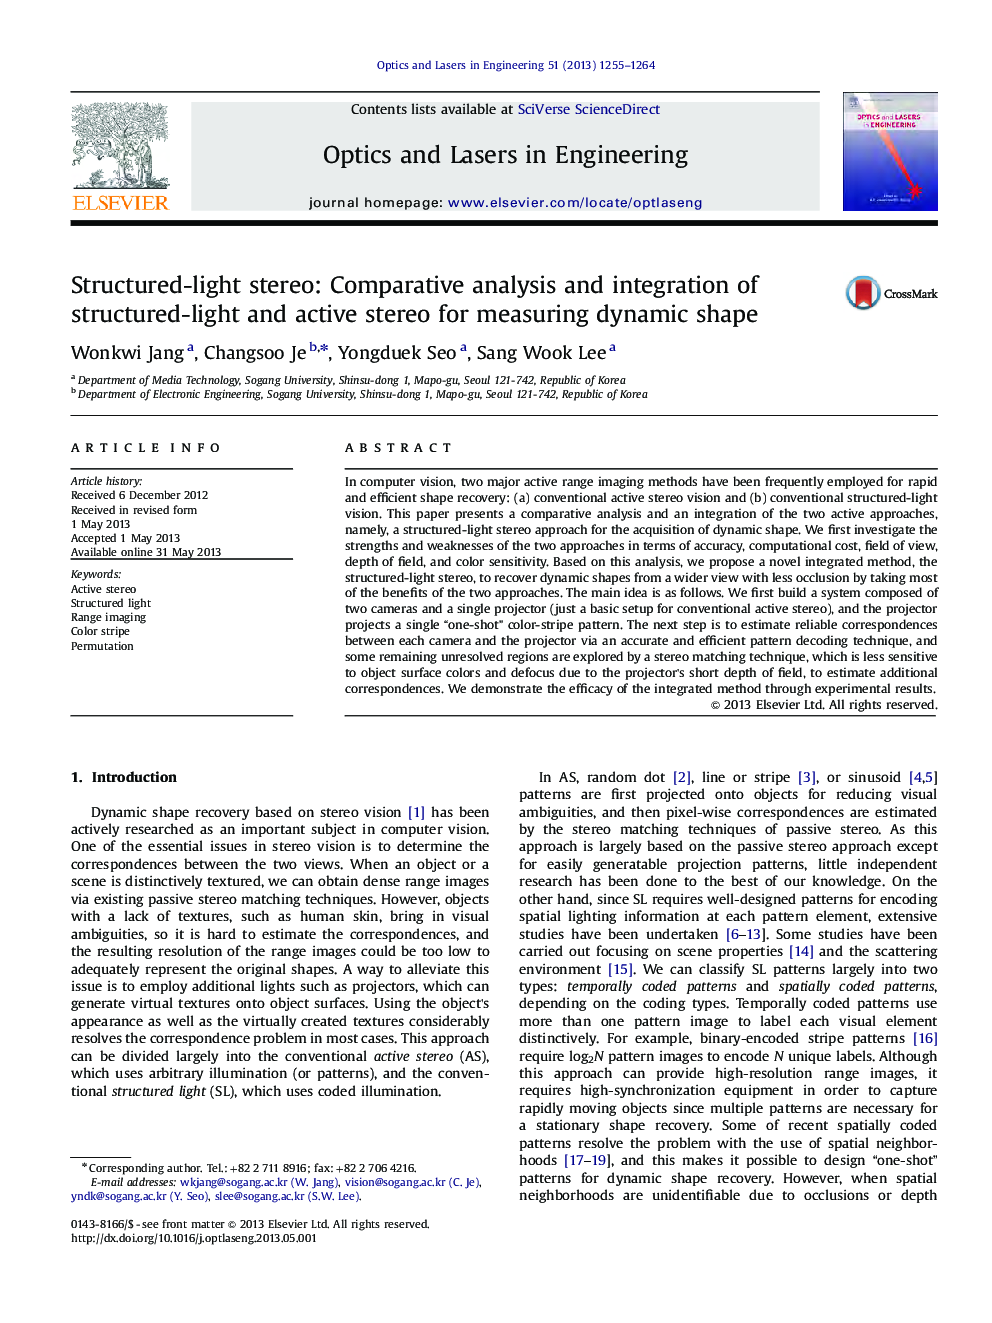 Structured-light stereo: Comparative analysis and integration of structured-light and active stereo for measuring dynamic shape